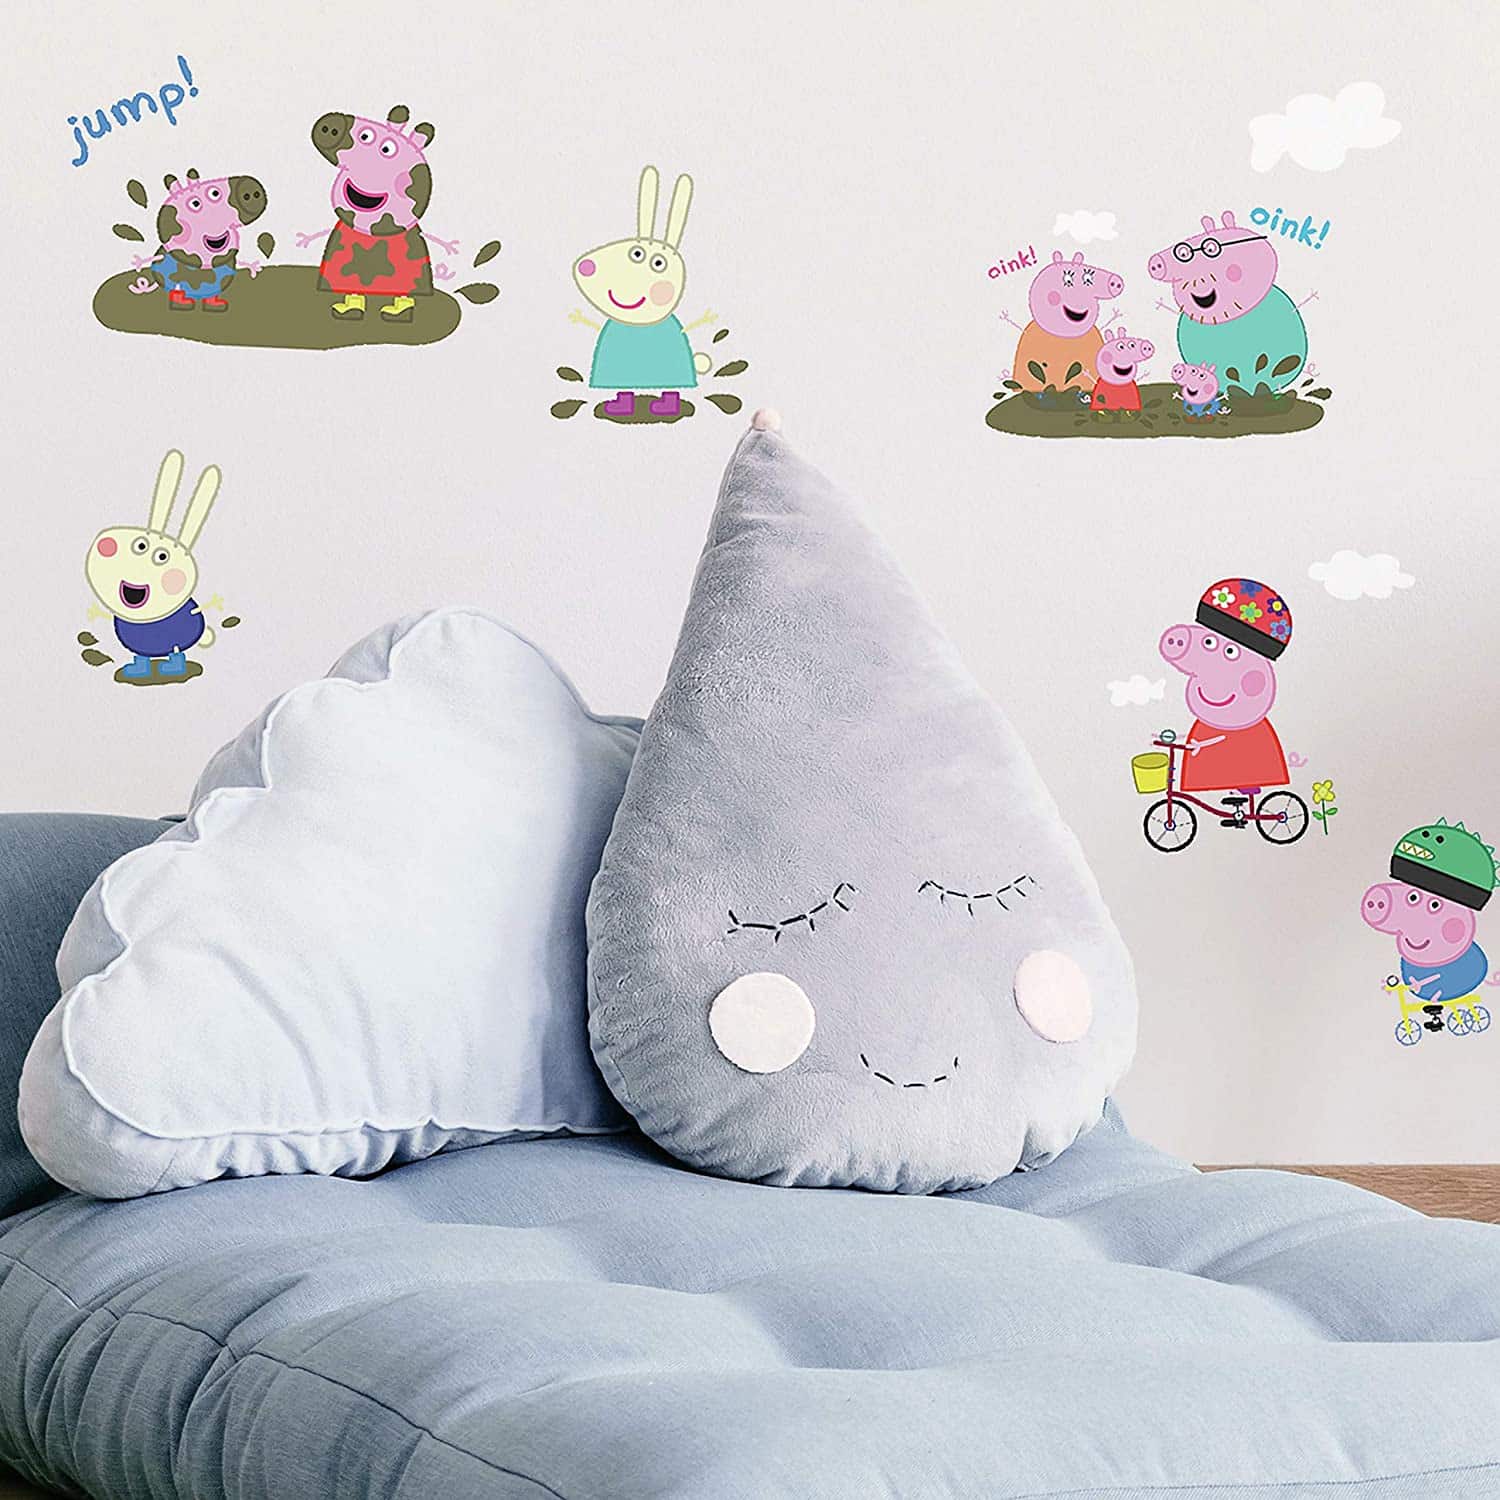 Peppa Pig Wallpaper and Decals – February 2023